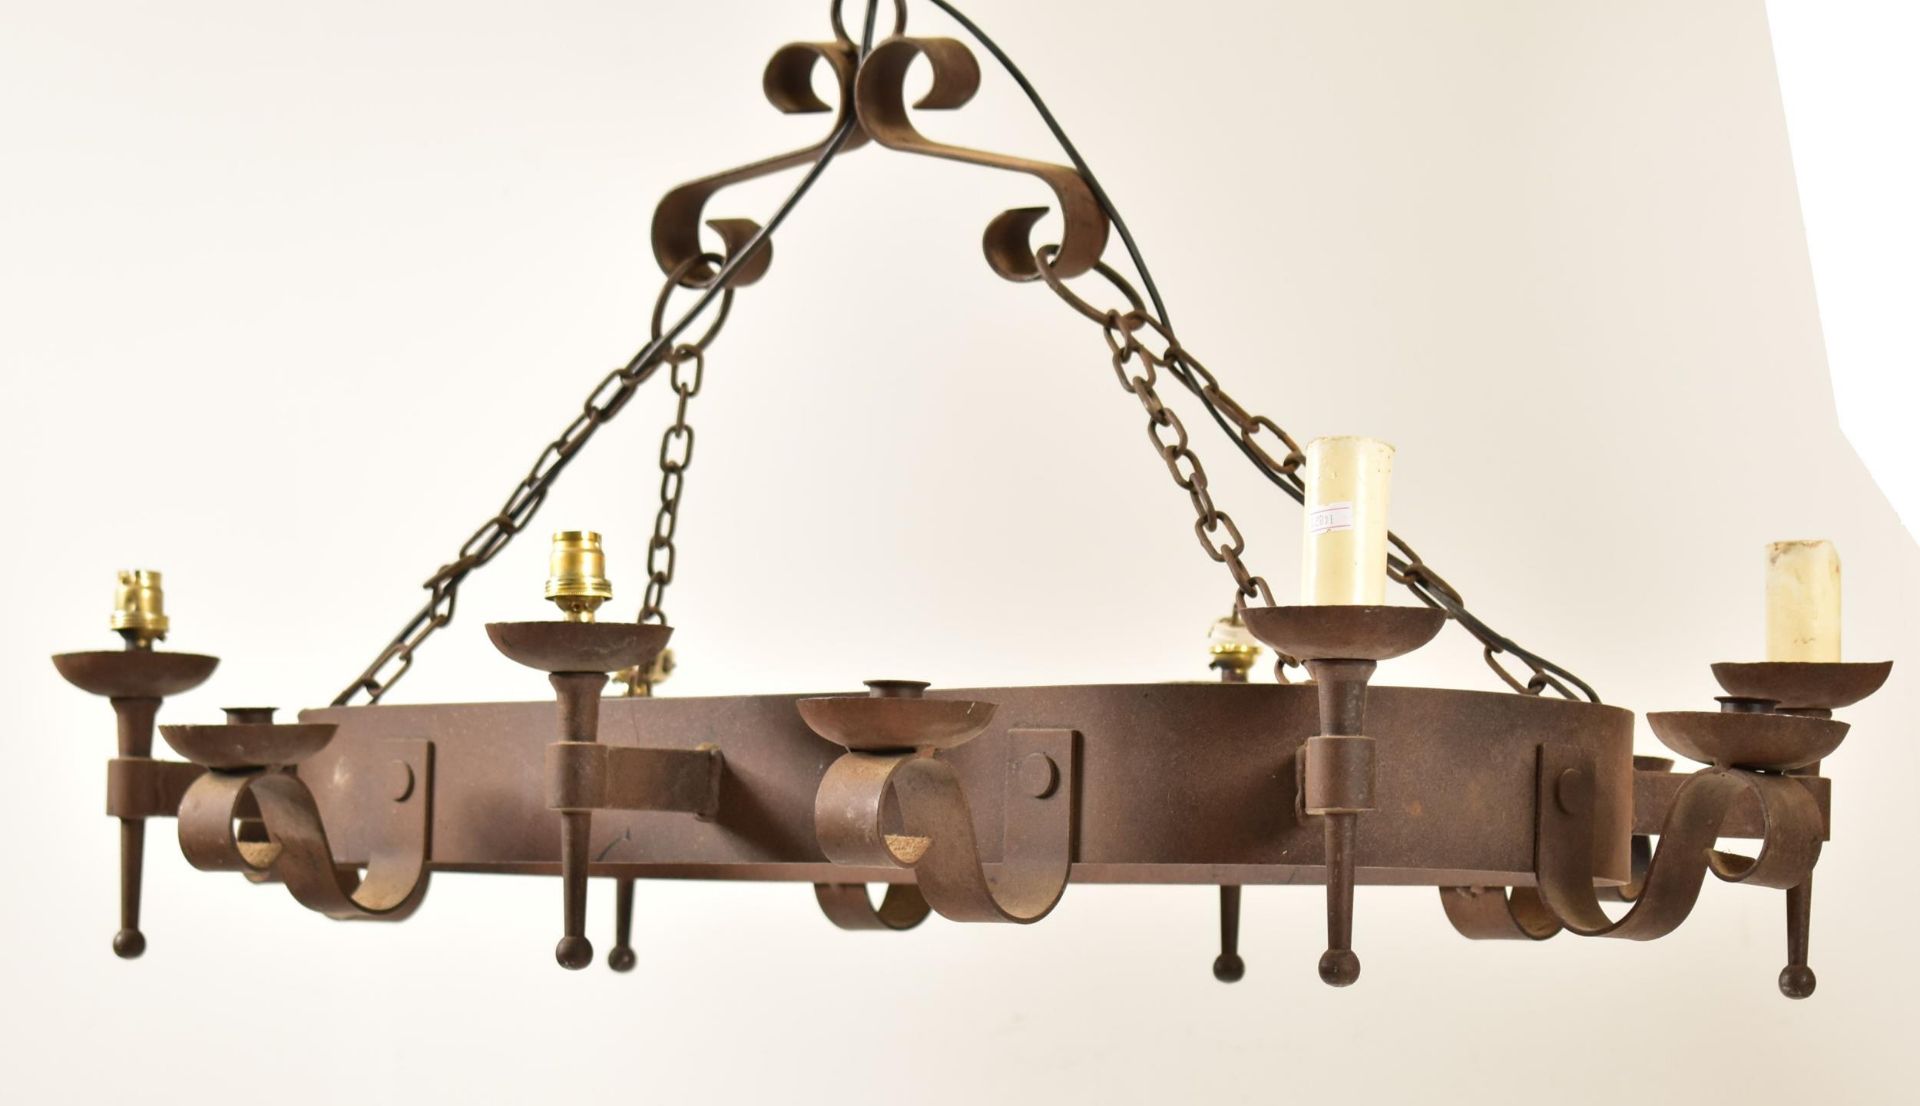 20TH CENTURY MEDIEVAL REVIVAL CAST IRON CHANDELIER - Image 3 of 9